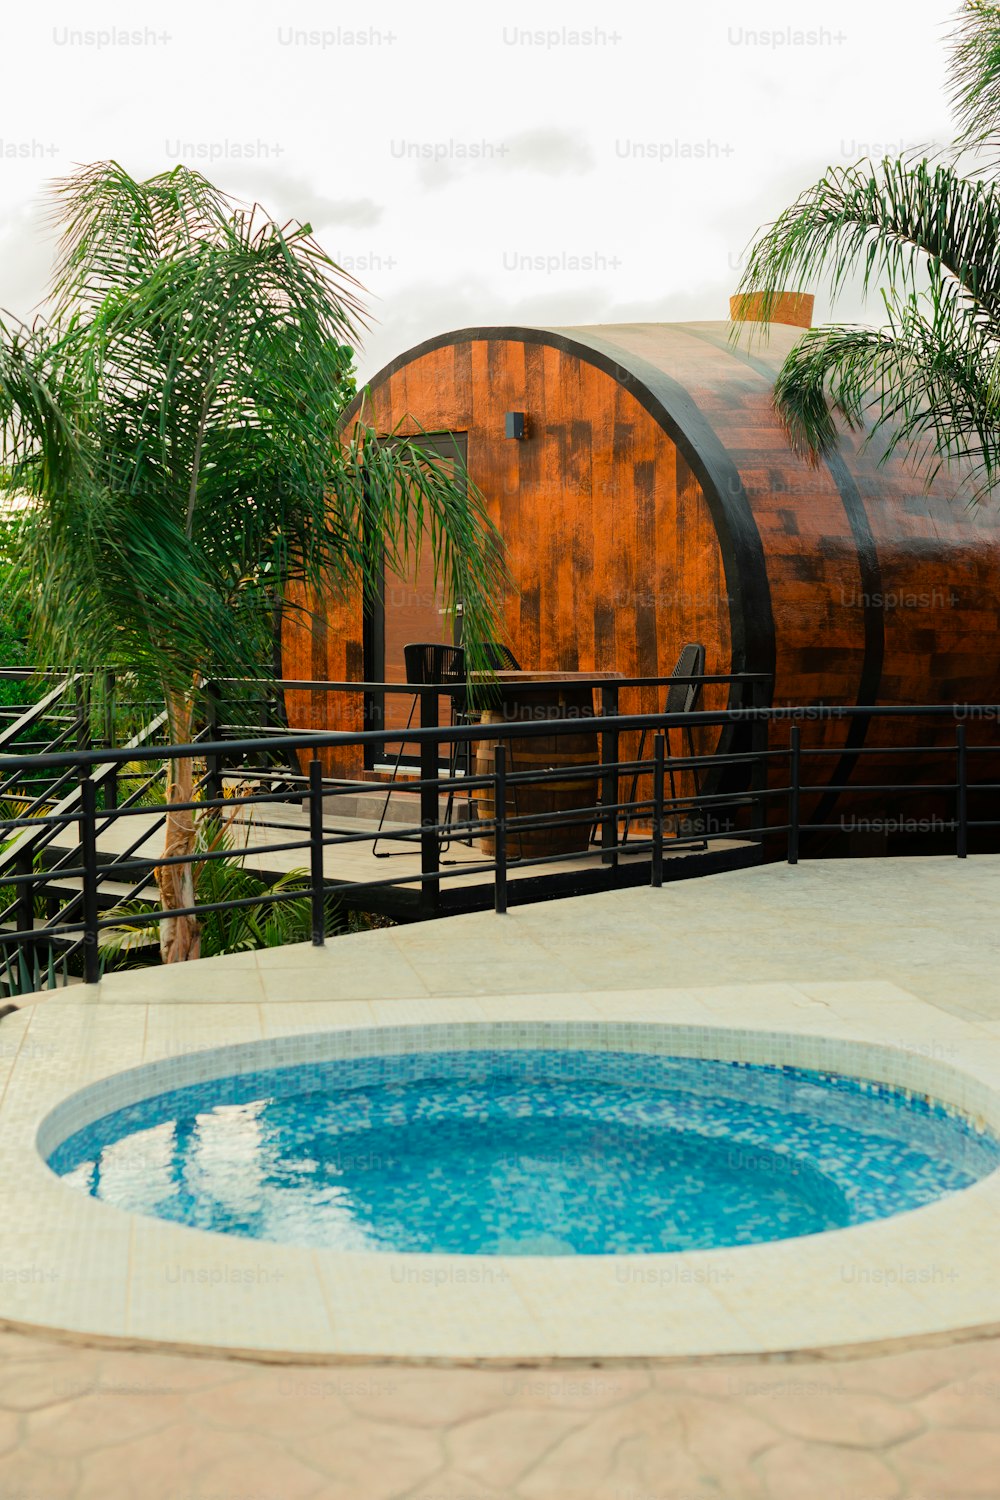 a hot tub sitting next to a wooden barrel